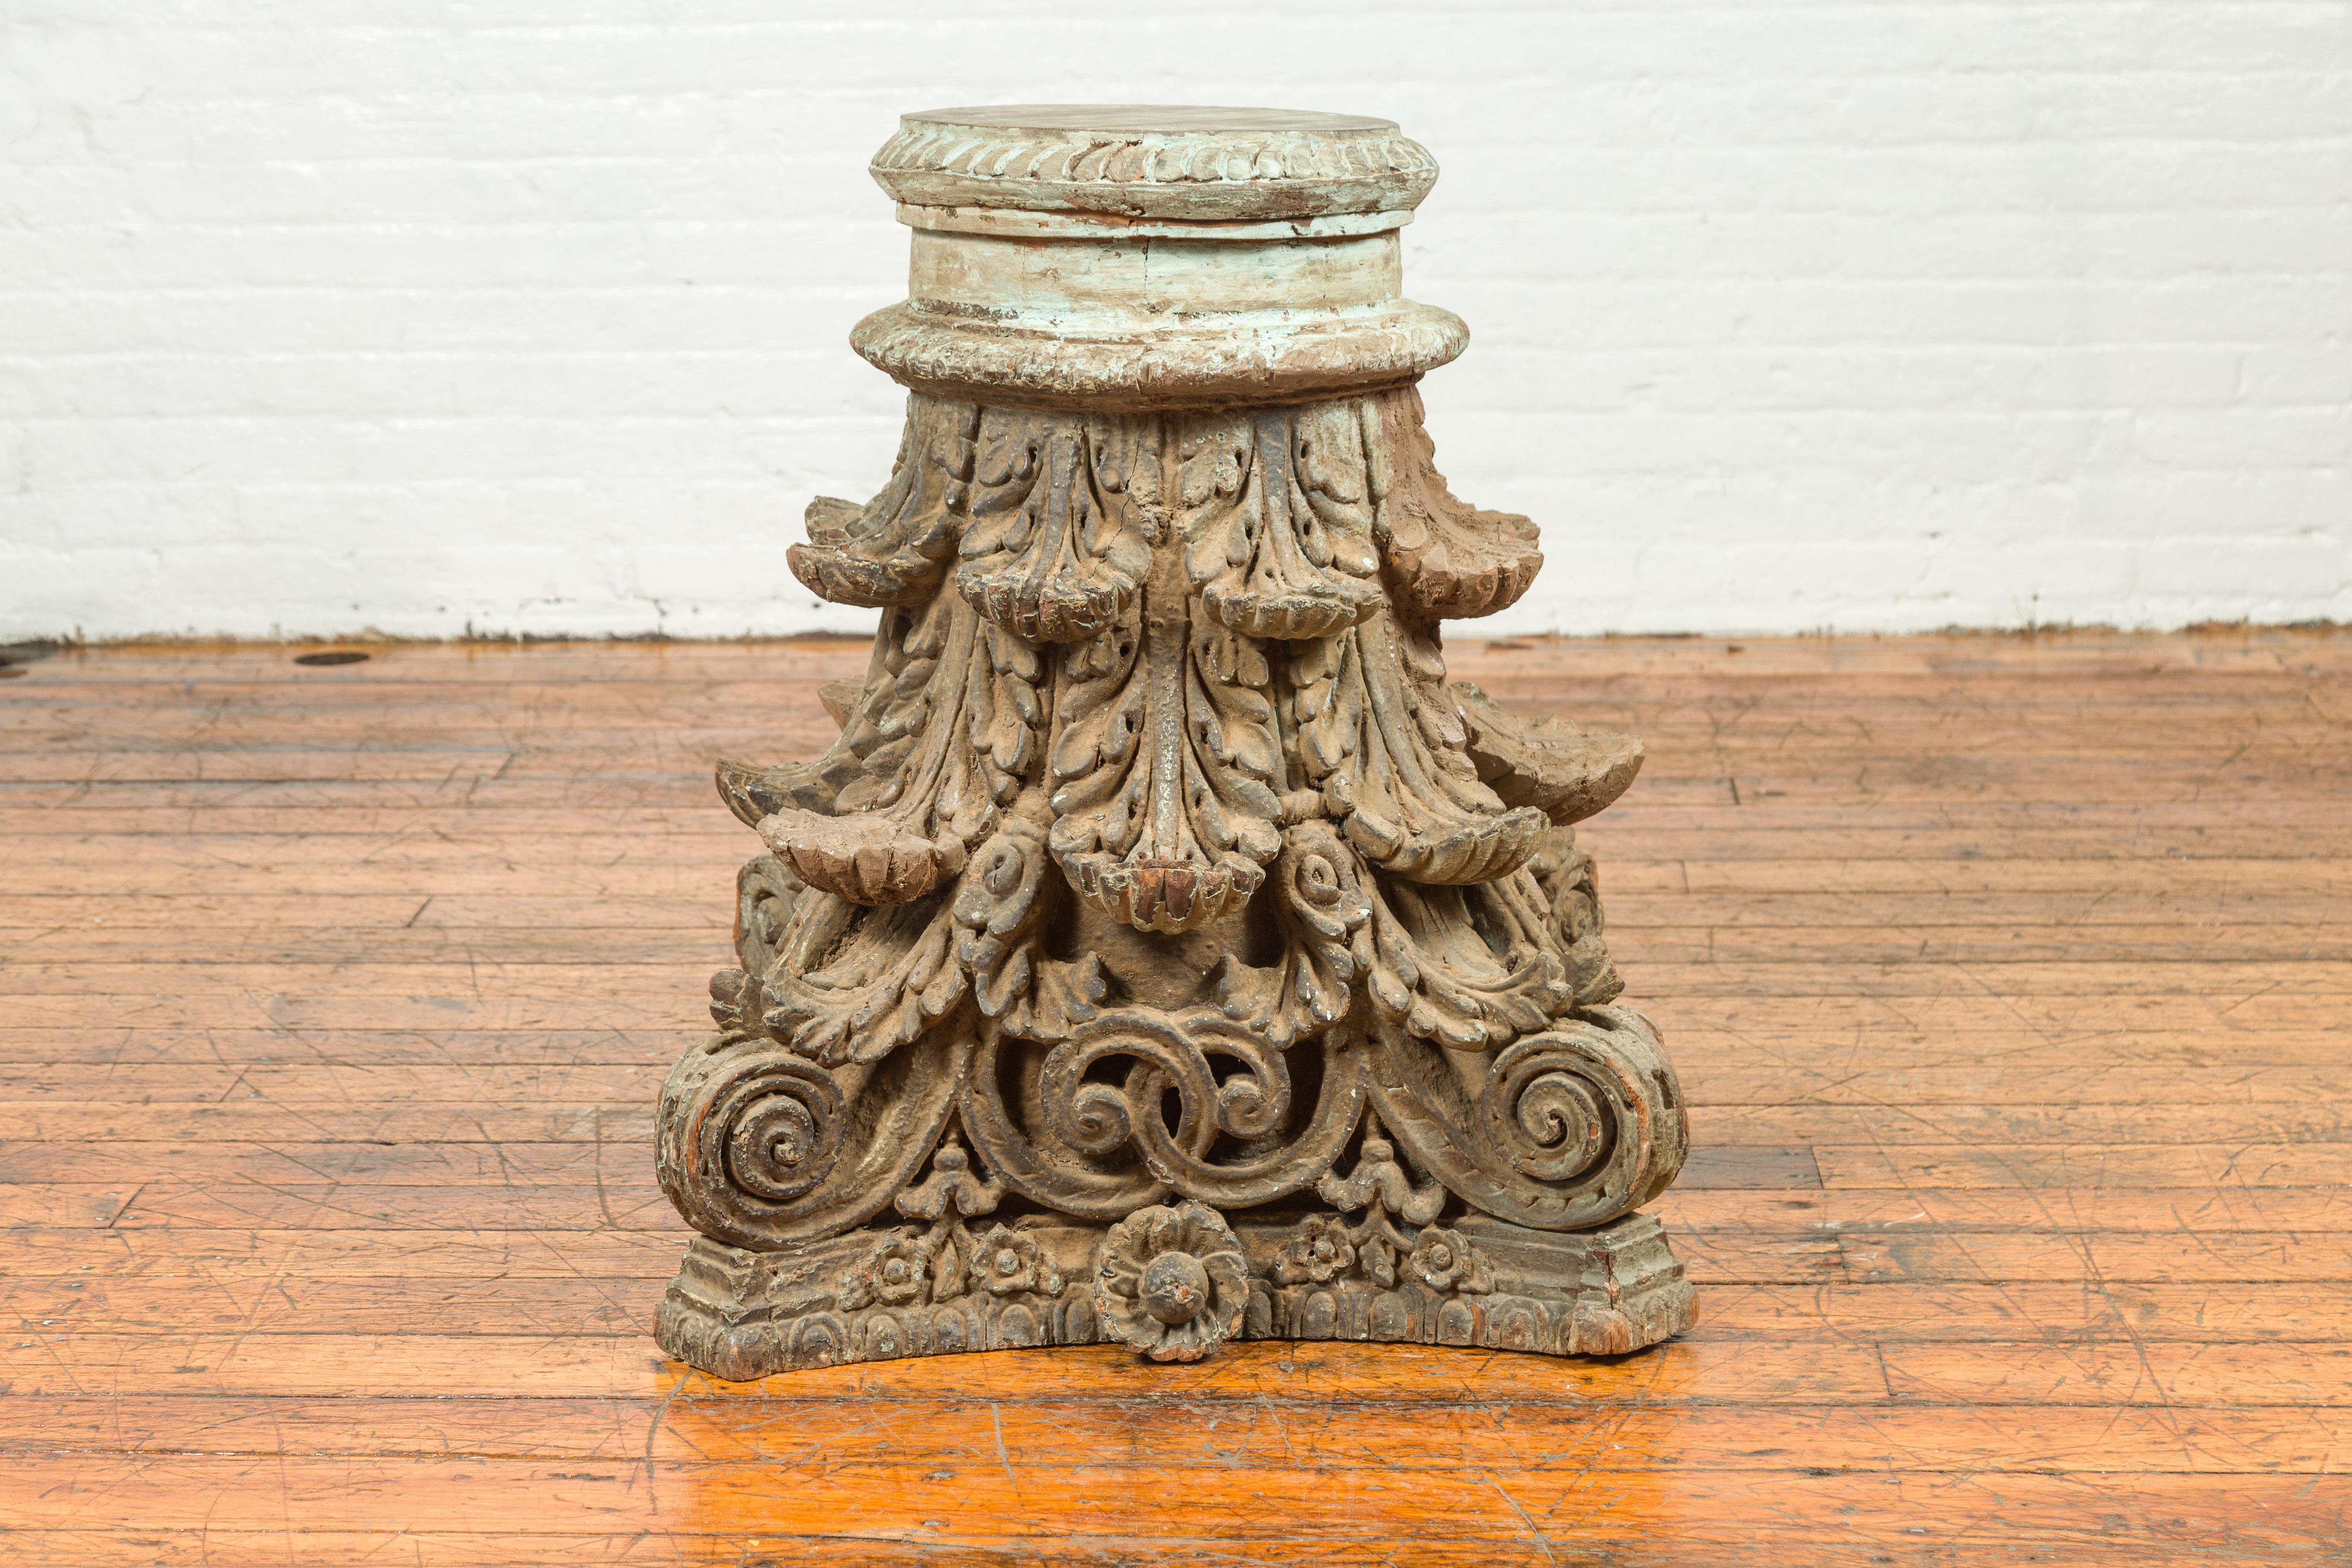 Indian Antique Corinthian Temple Capital Carving with Distressed Patina For Sale 2